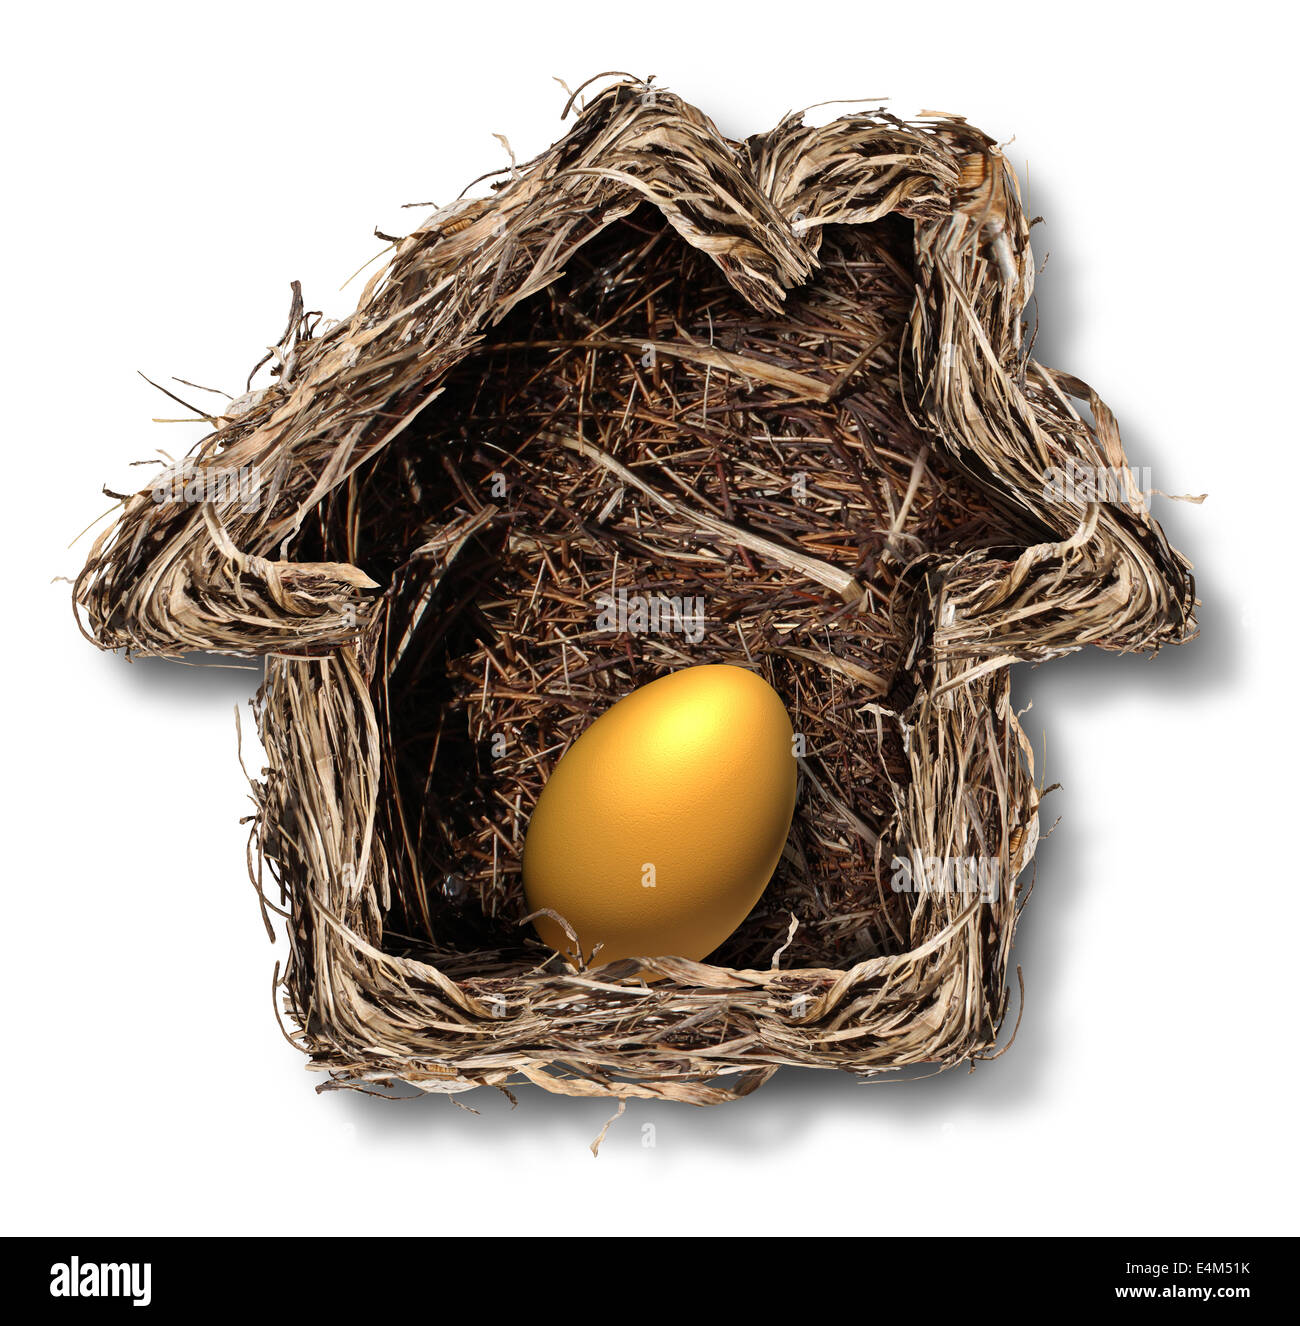 Home finances and residential equity symbol as a bird nest shaped as a family house with a gold egg inside as a metaphor for fin Stock Photo